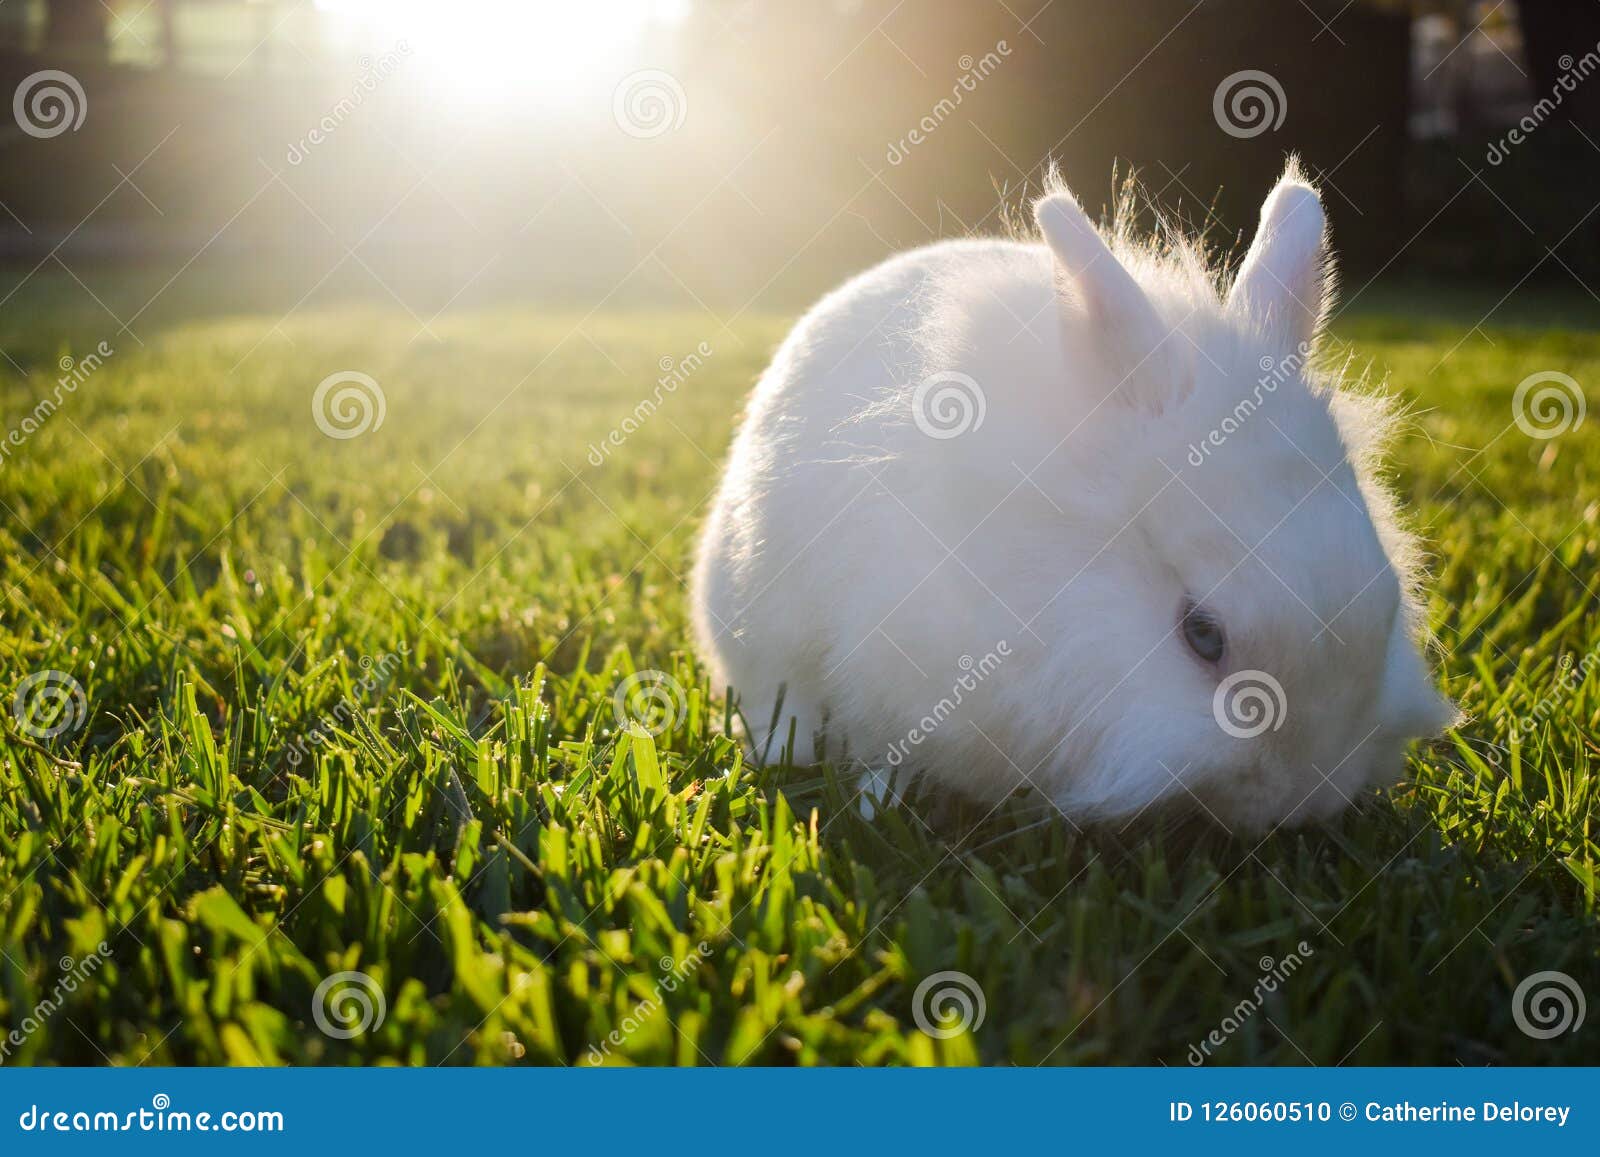 bunny playing in the grass